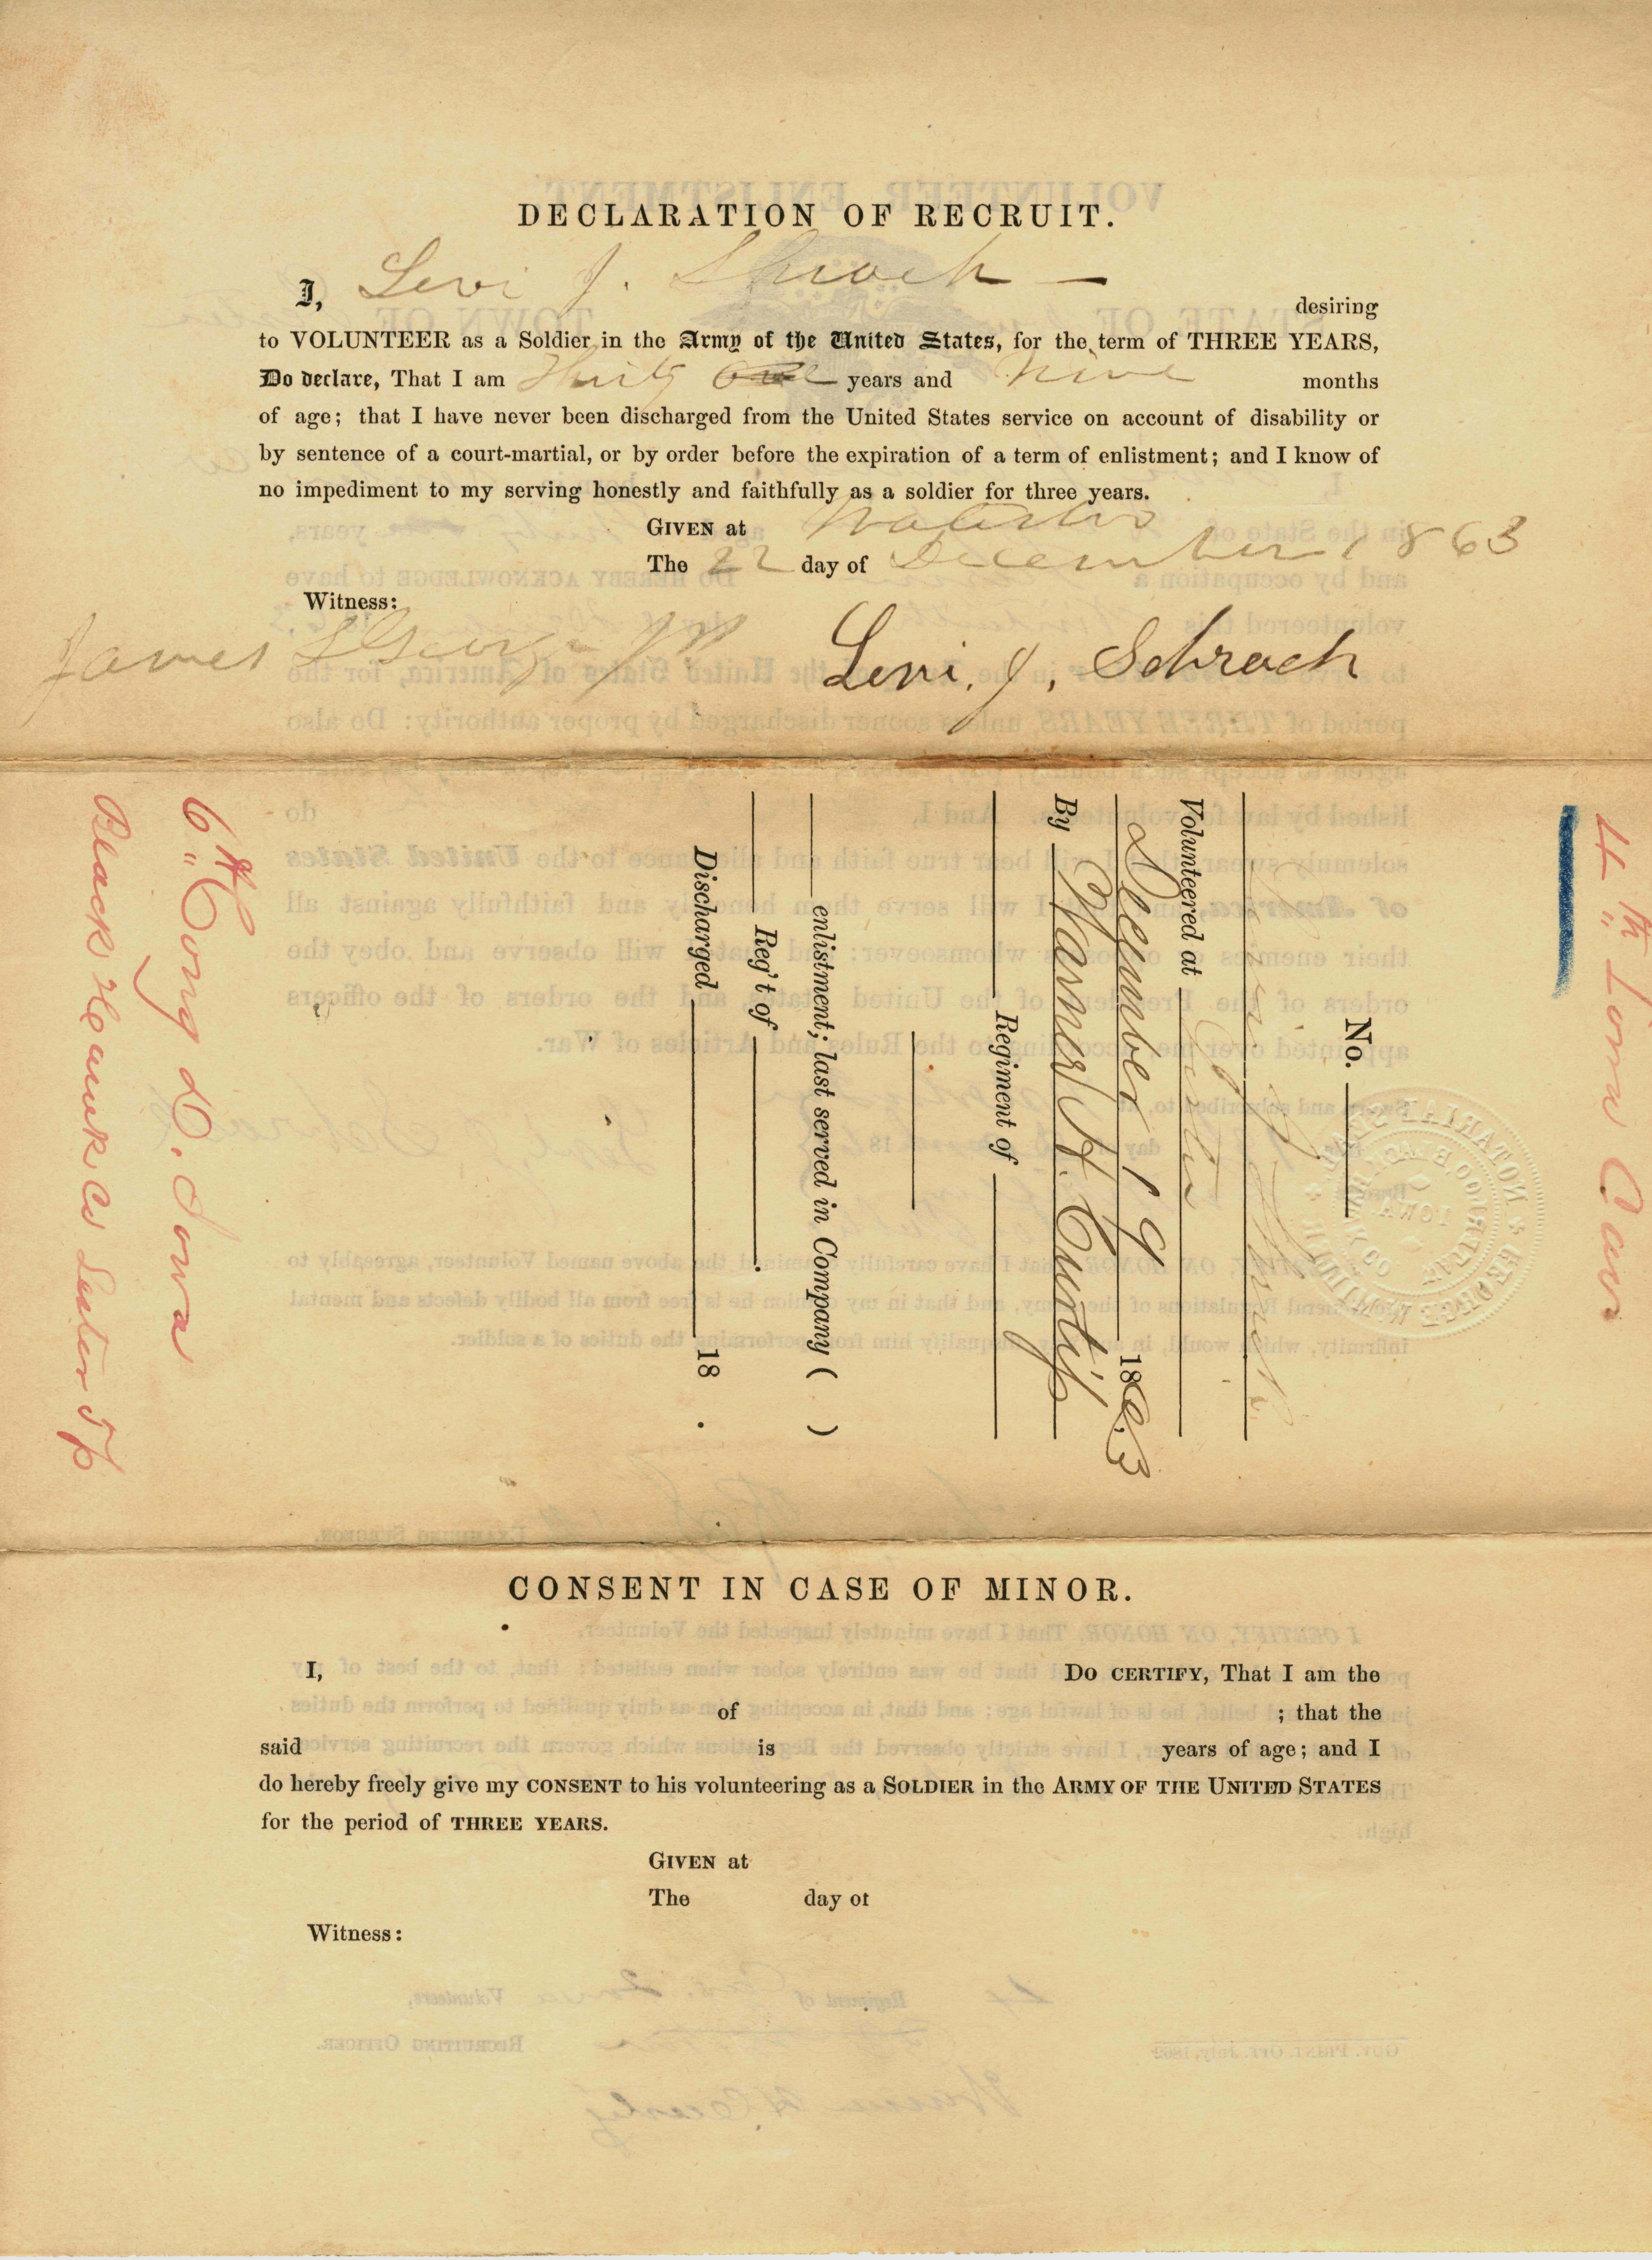 Image of a recruit's volunteer enlistment form, page 2